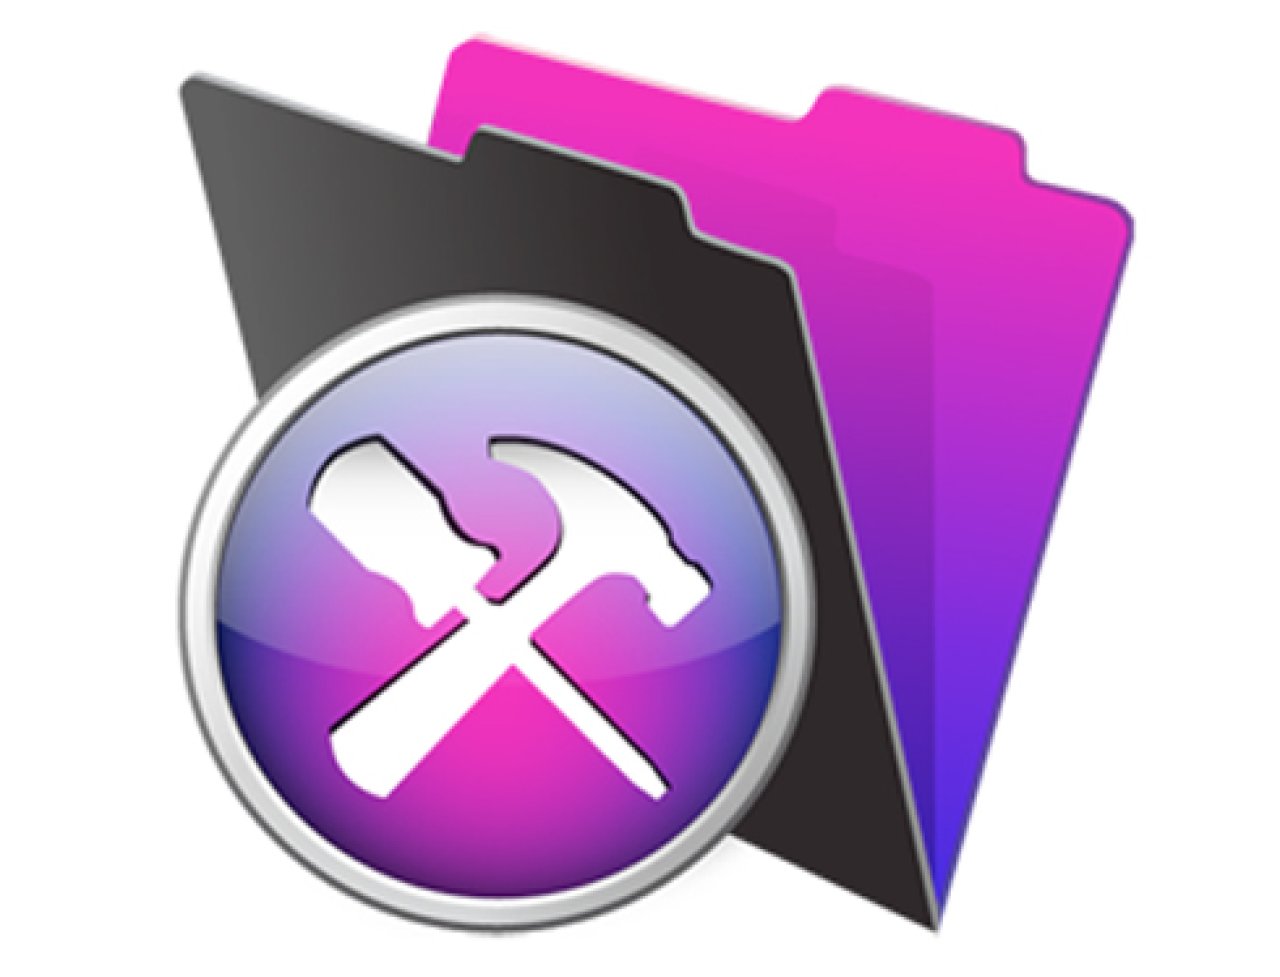 filemaker 12 what's new.